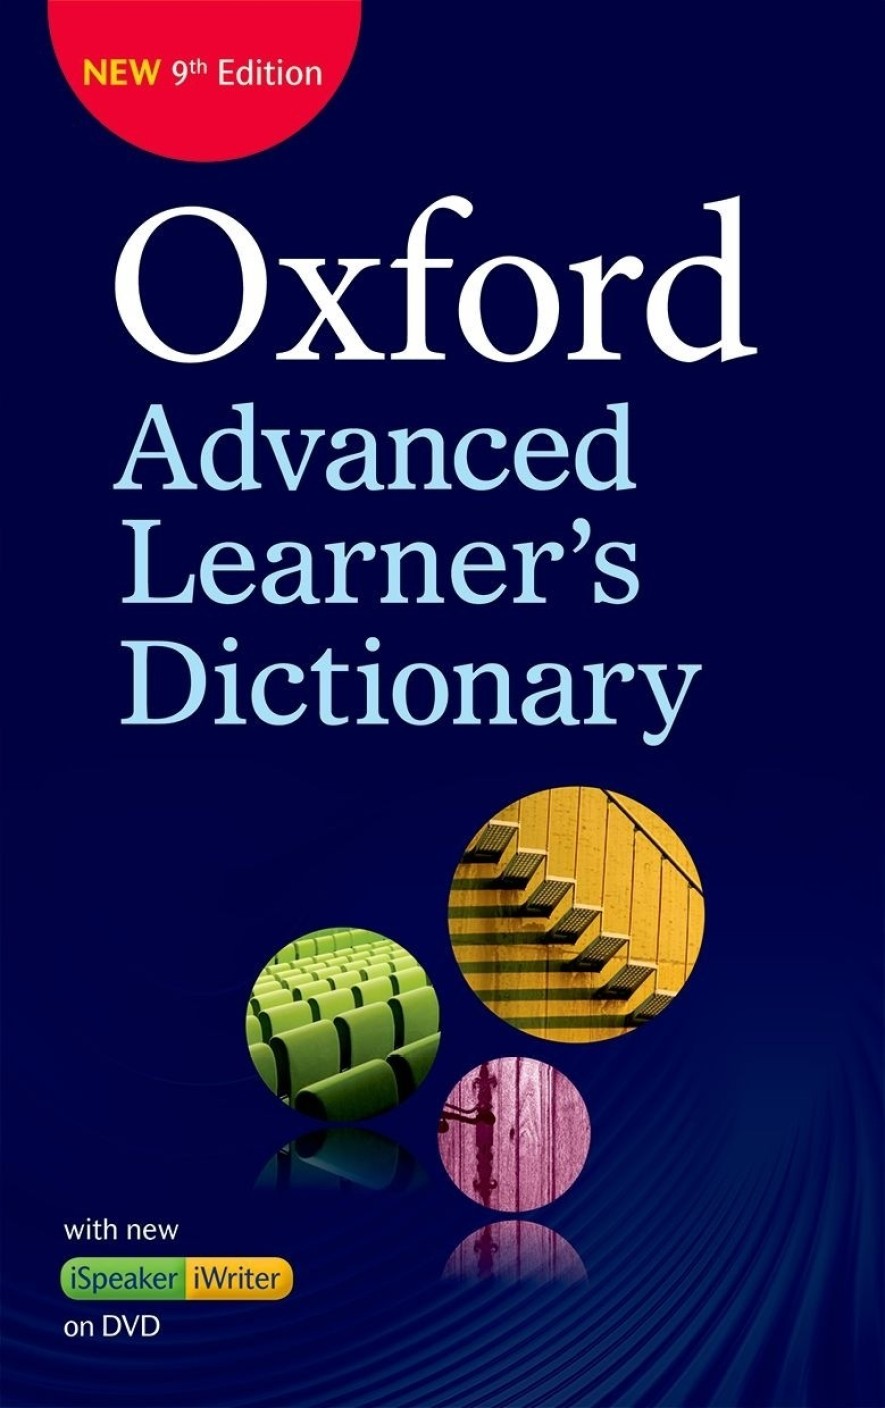 crooked oxford advanced learners dictionary